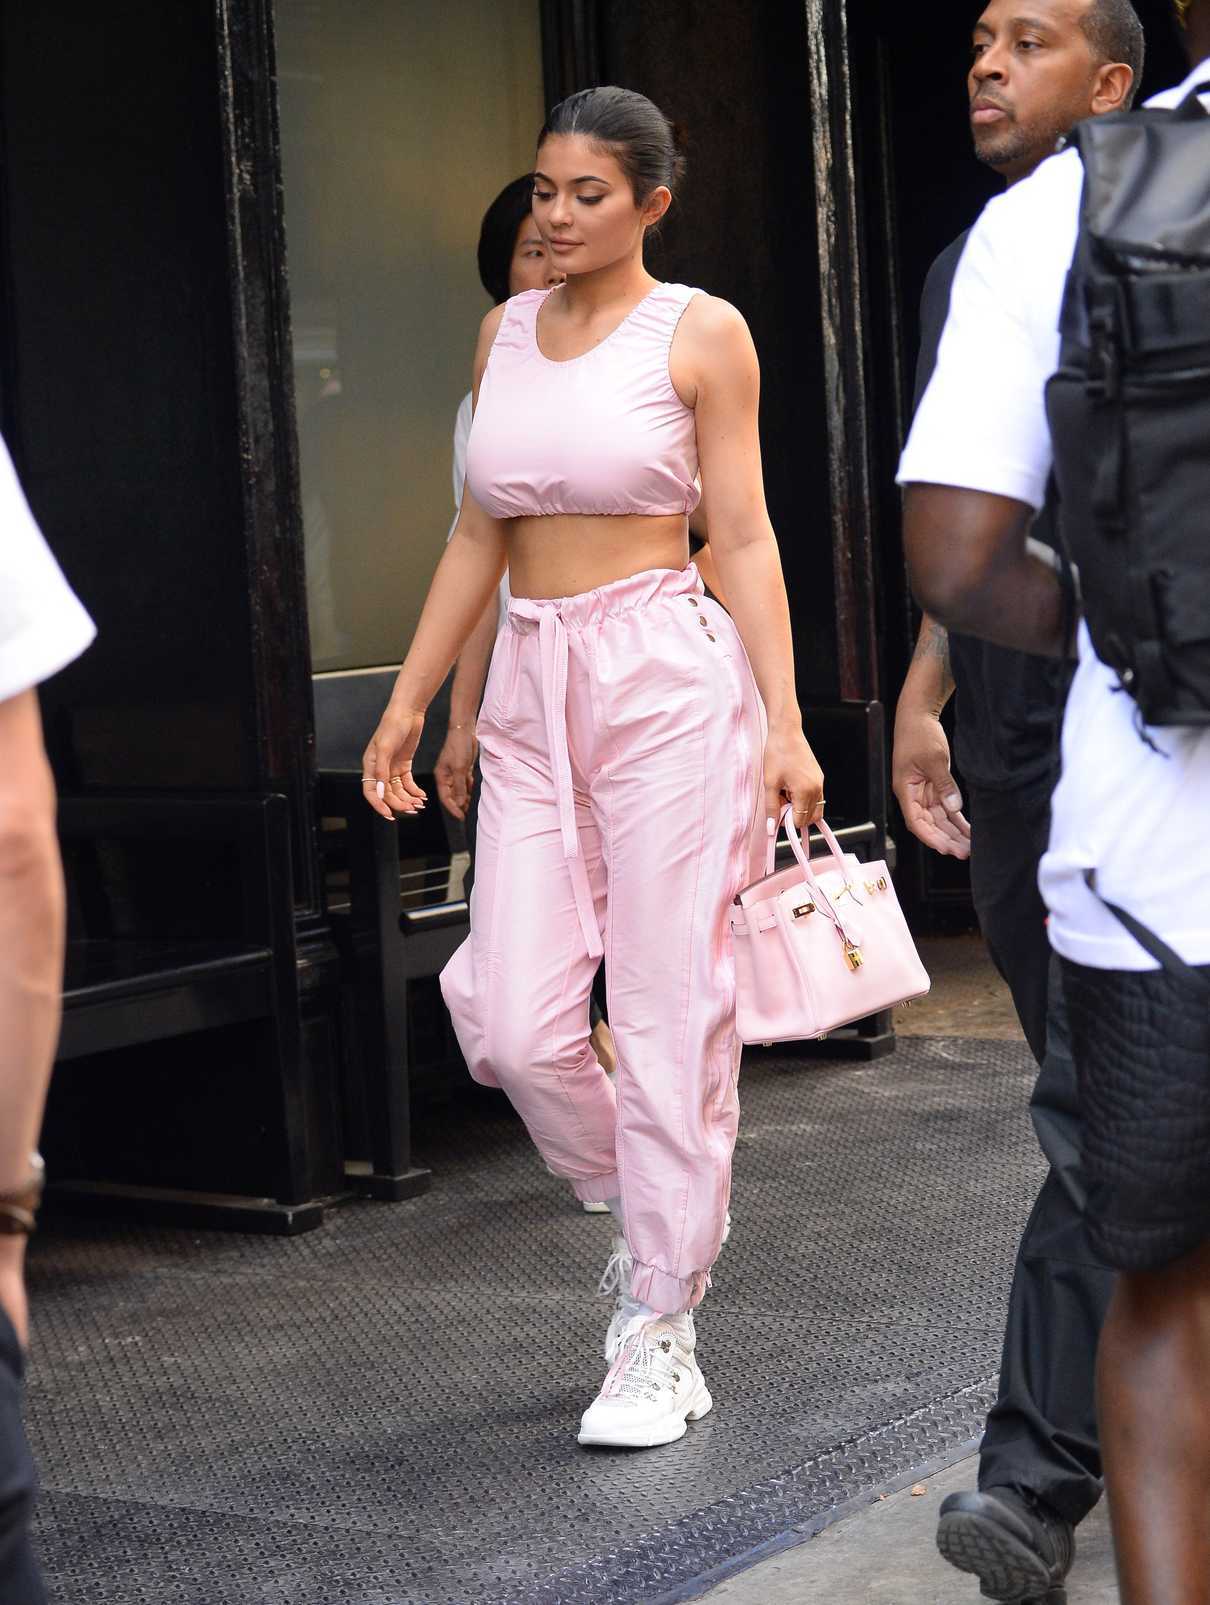 Kylie Jenner Wears a Pink Sports Bra as She Goes Shopping at the Chrome Hearts Store in the West Village in New York City 07/18/2018-4